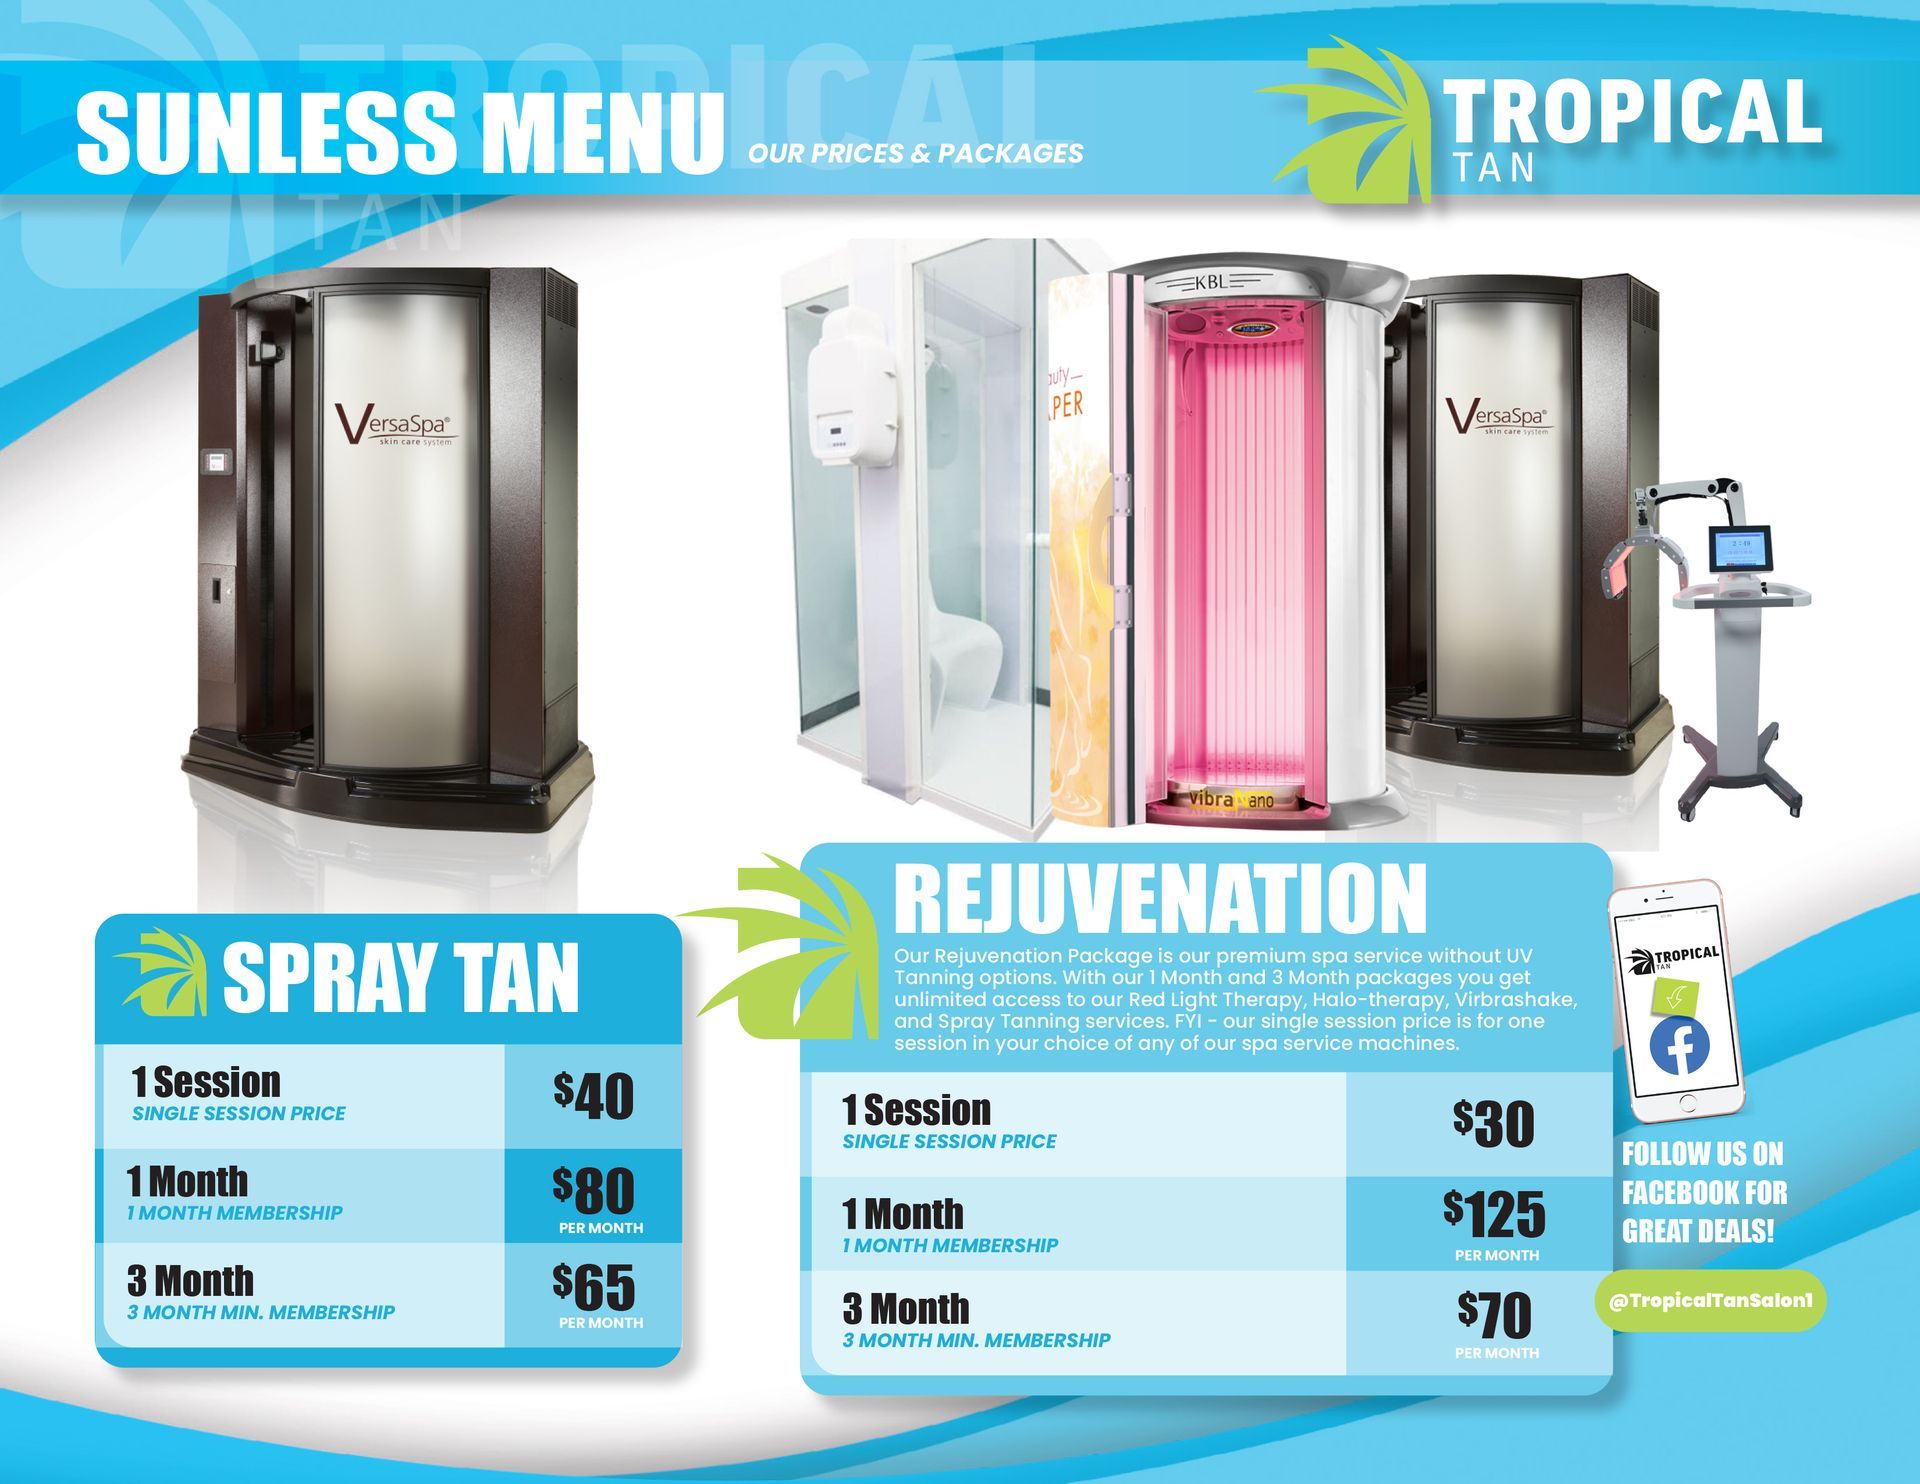 sunless tanning price menu for spray tan and rejuvenation spa package with red light